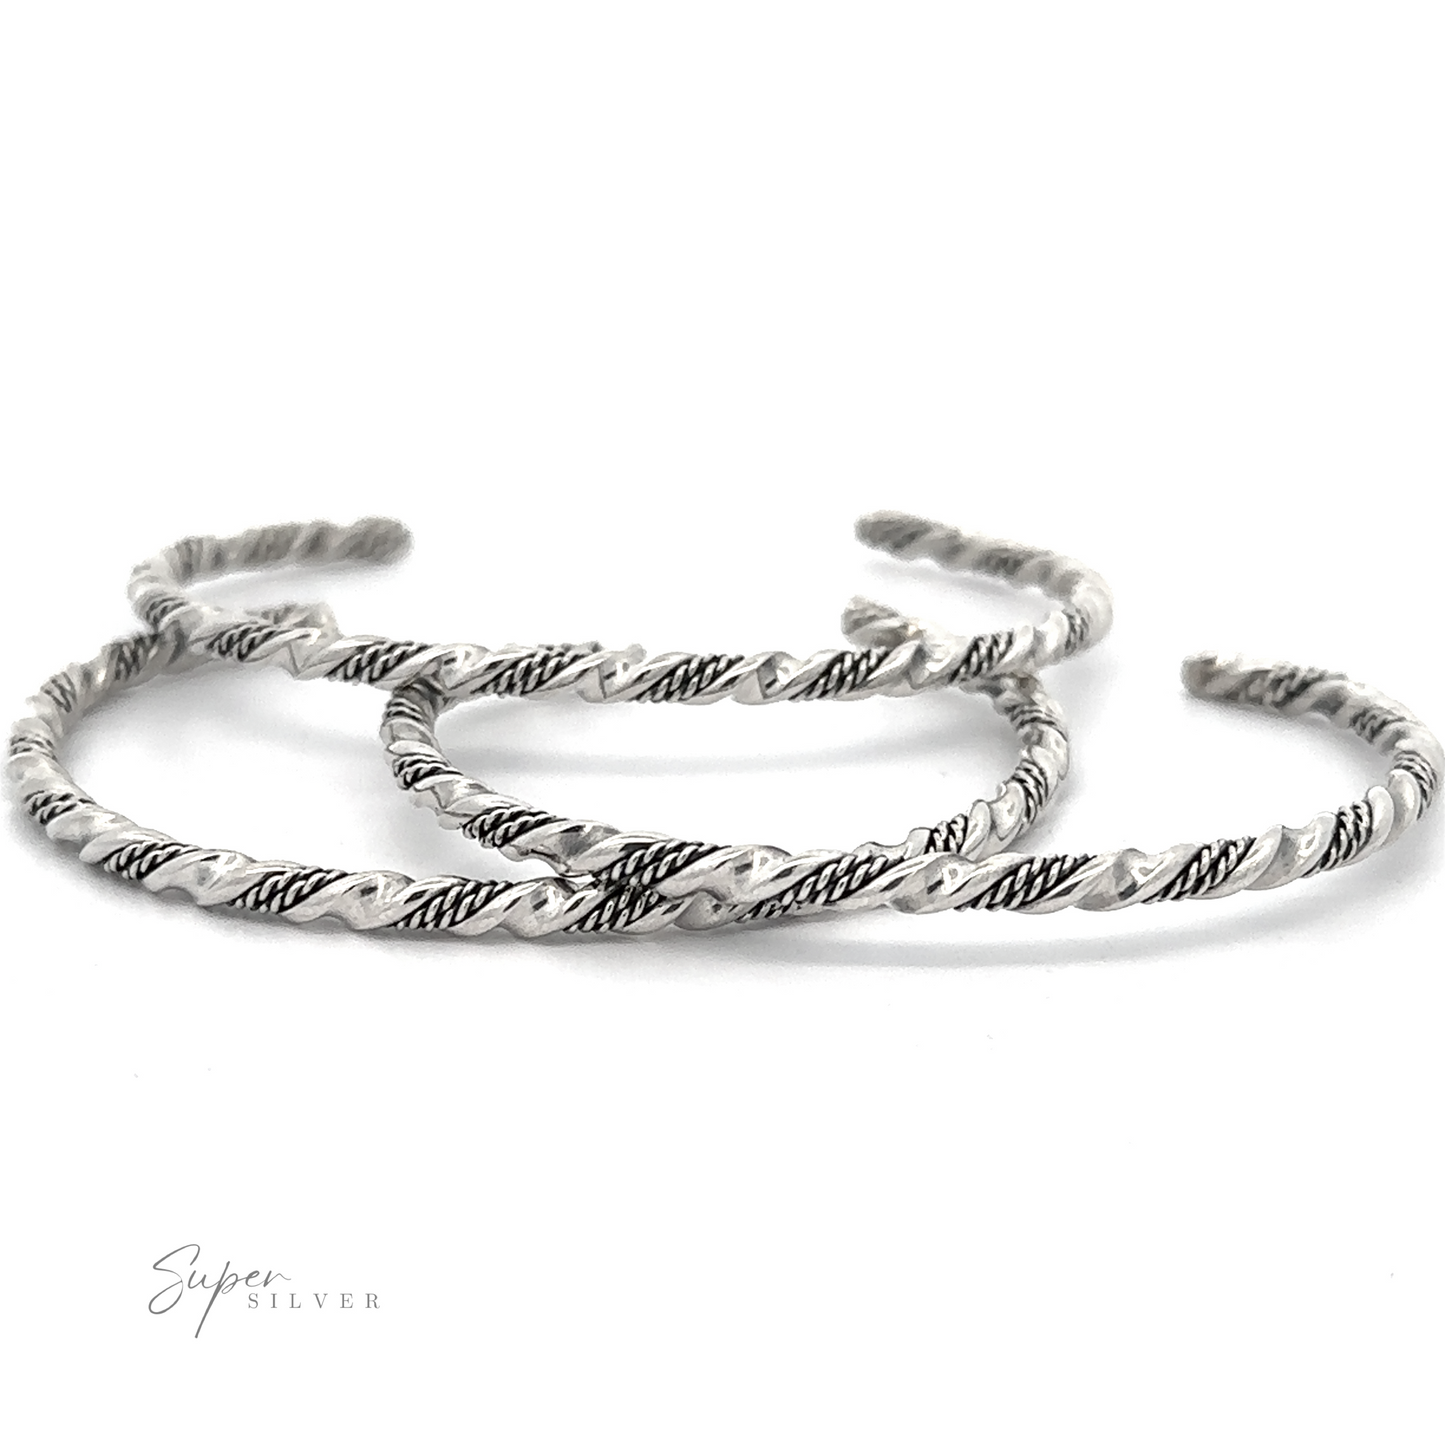 
                  
                    Three twisted, handmade Native American Handmade Silver Rope Twist Cuff bangles with intricate patterns are arranged on a white background. The brand "Super Silver" is labeled in the bottom left corner, showcasing their Native American-inspired design.
                  
                